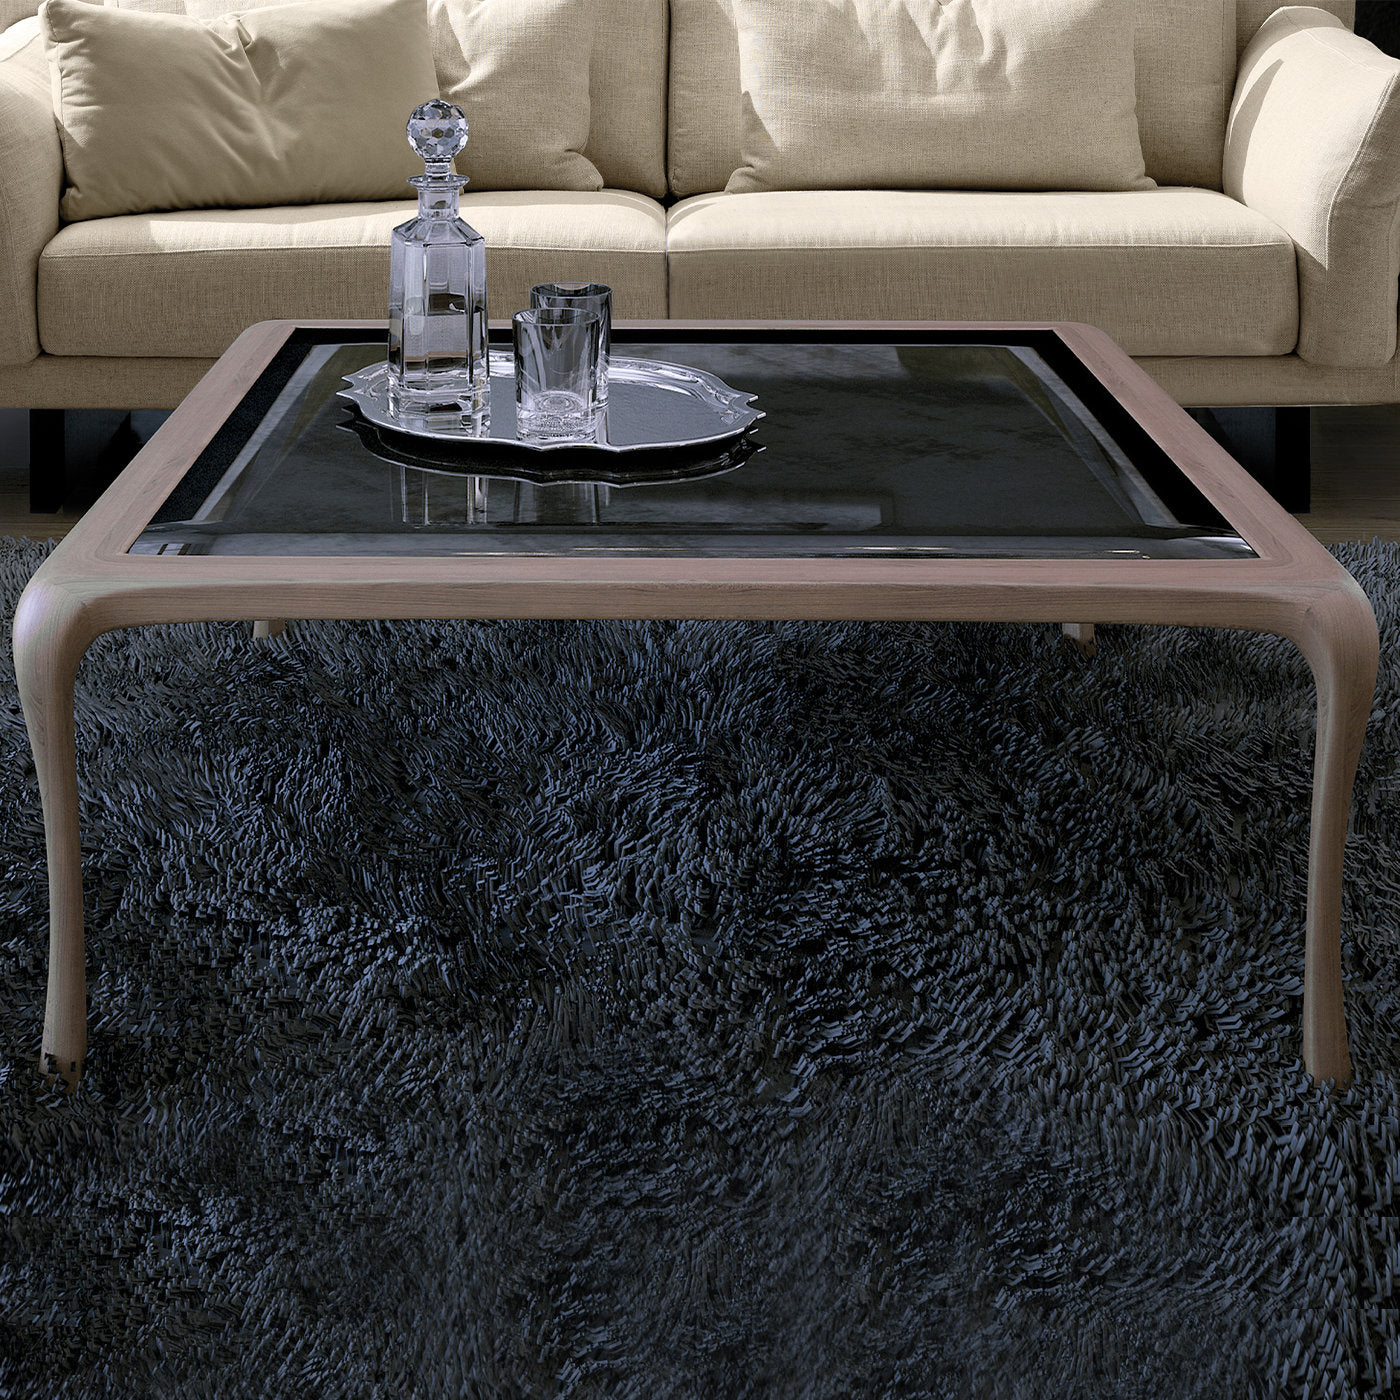 Light-Walnut Square Coffee Table with Glass Top - Alternative view 1